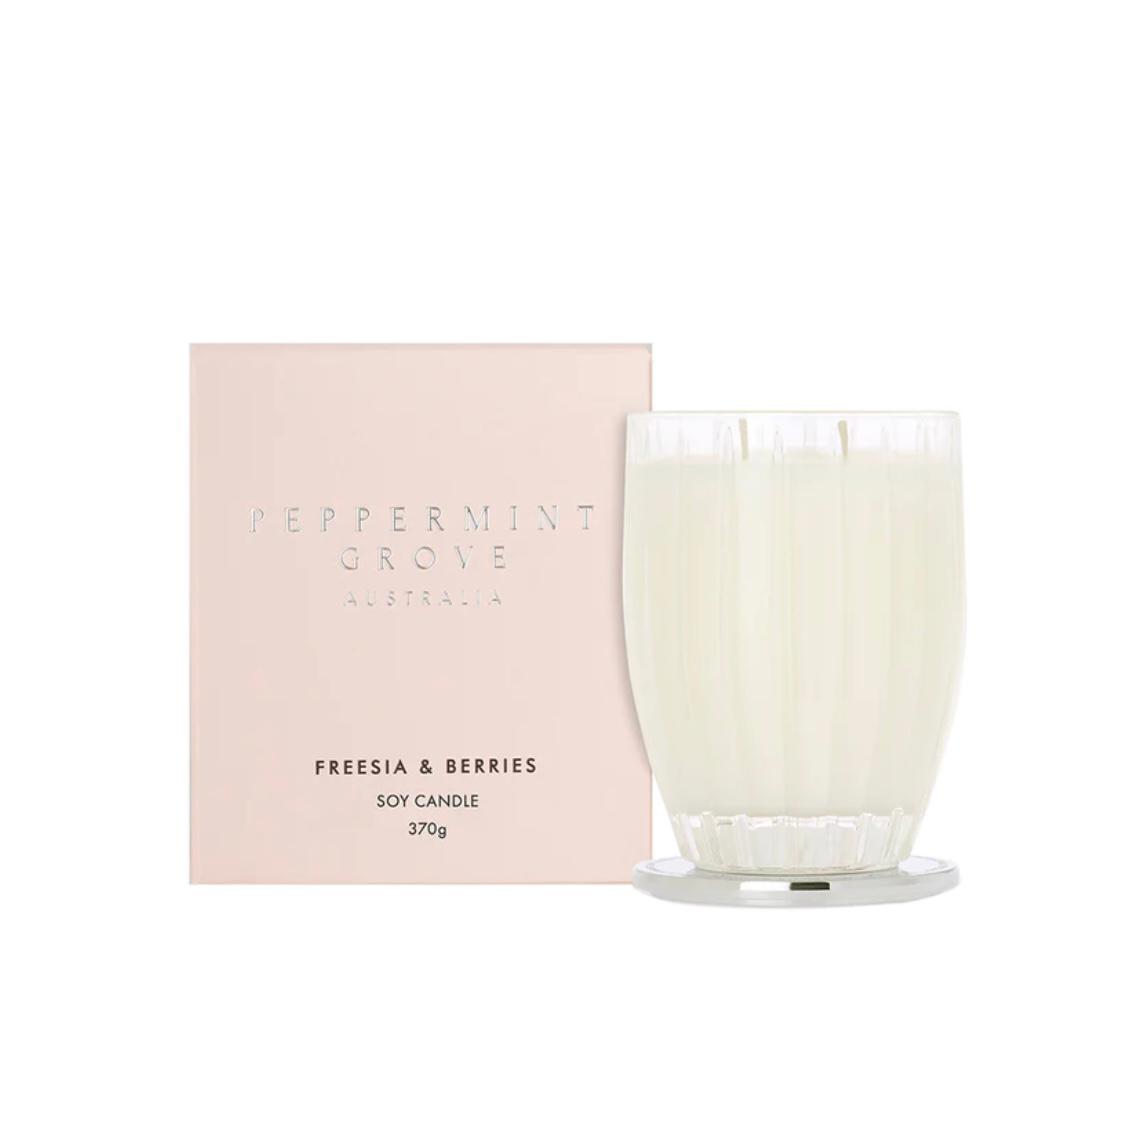 (Peppermint Grove) Freesia & Berries Soy Candle